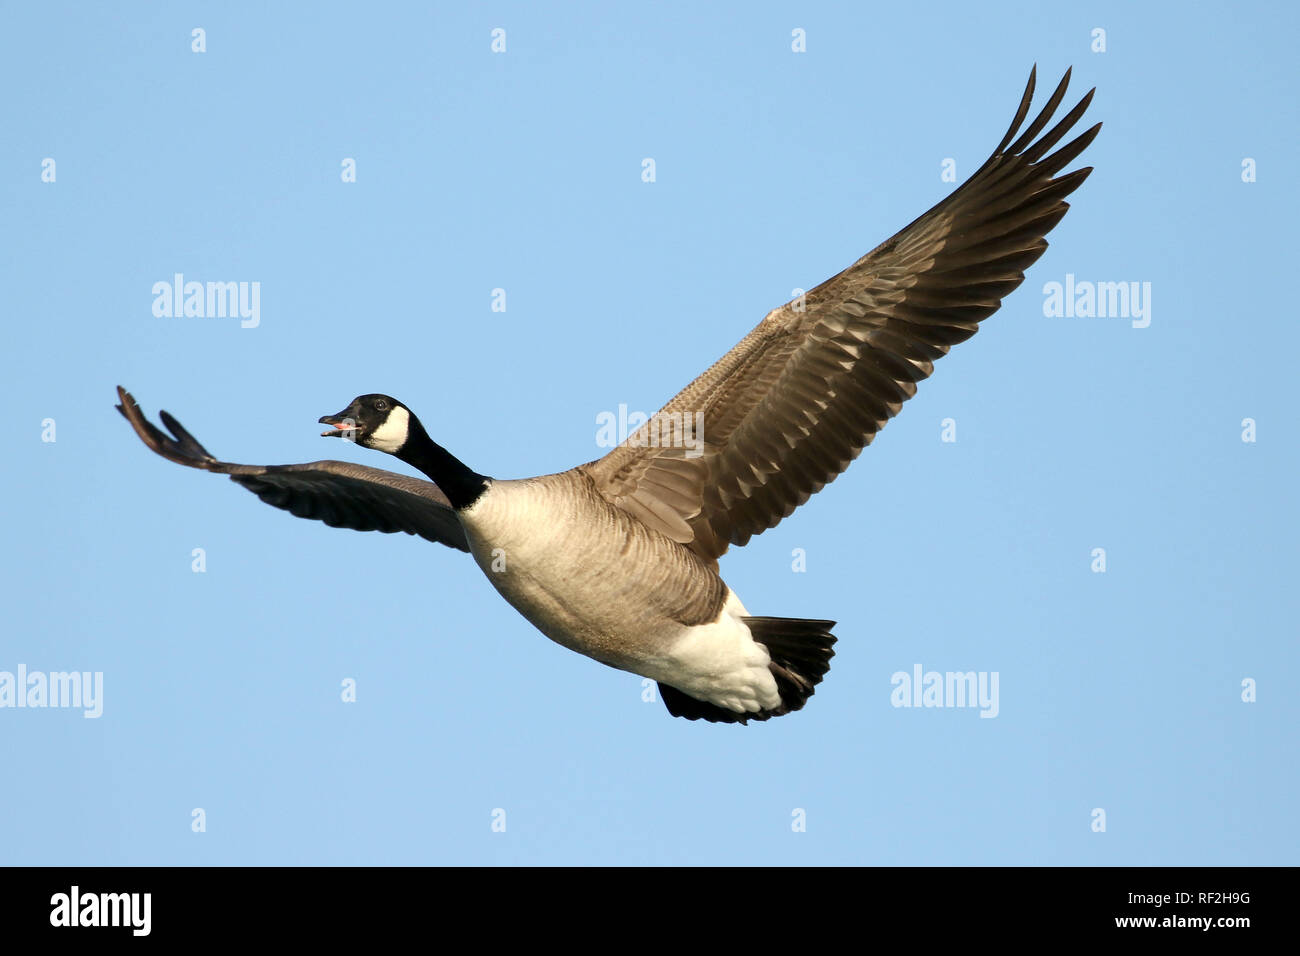 Canada Goose flying against winter blue sky Stock Photo - Alamy